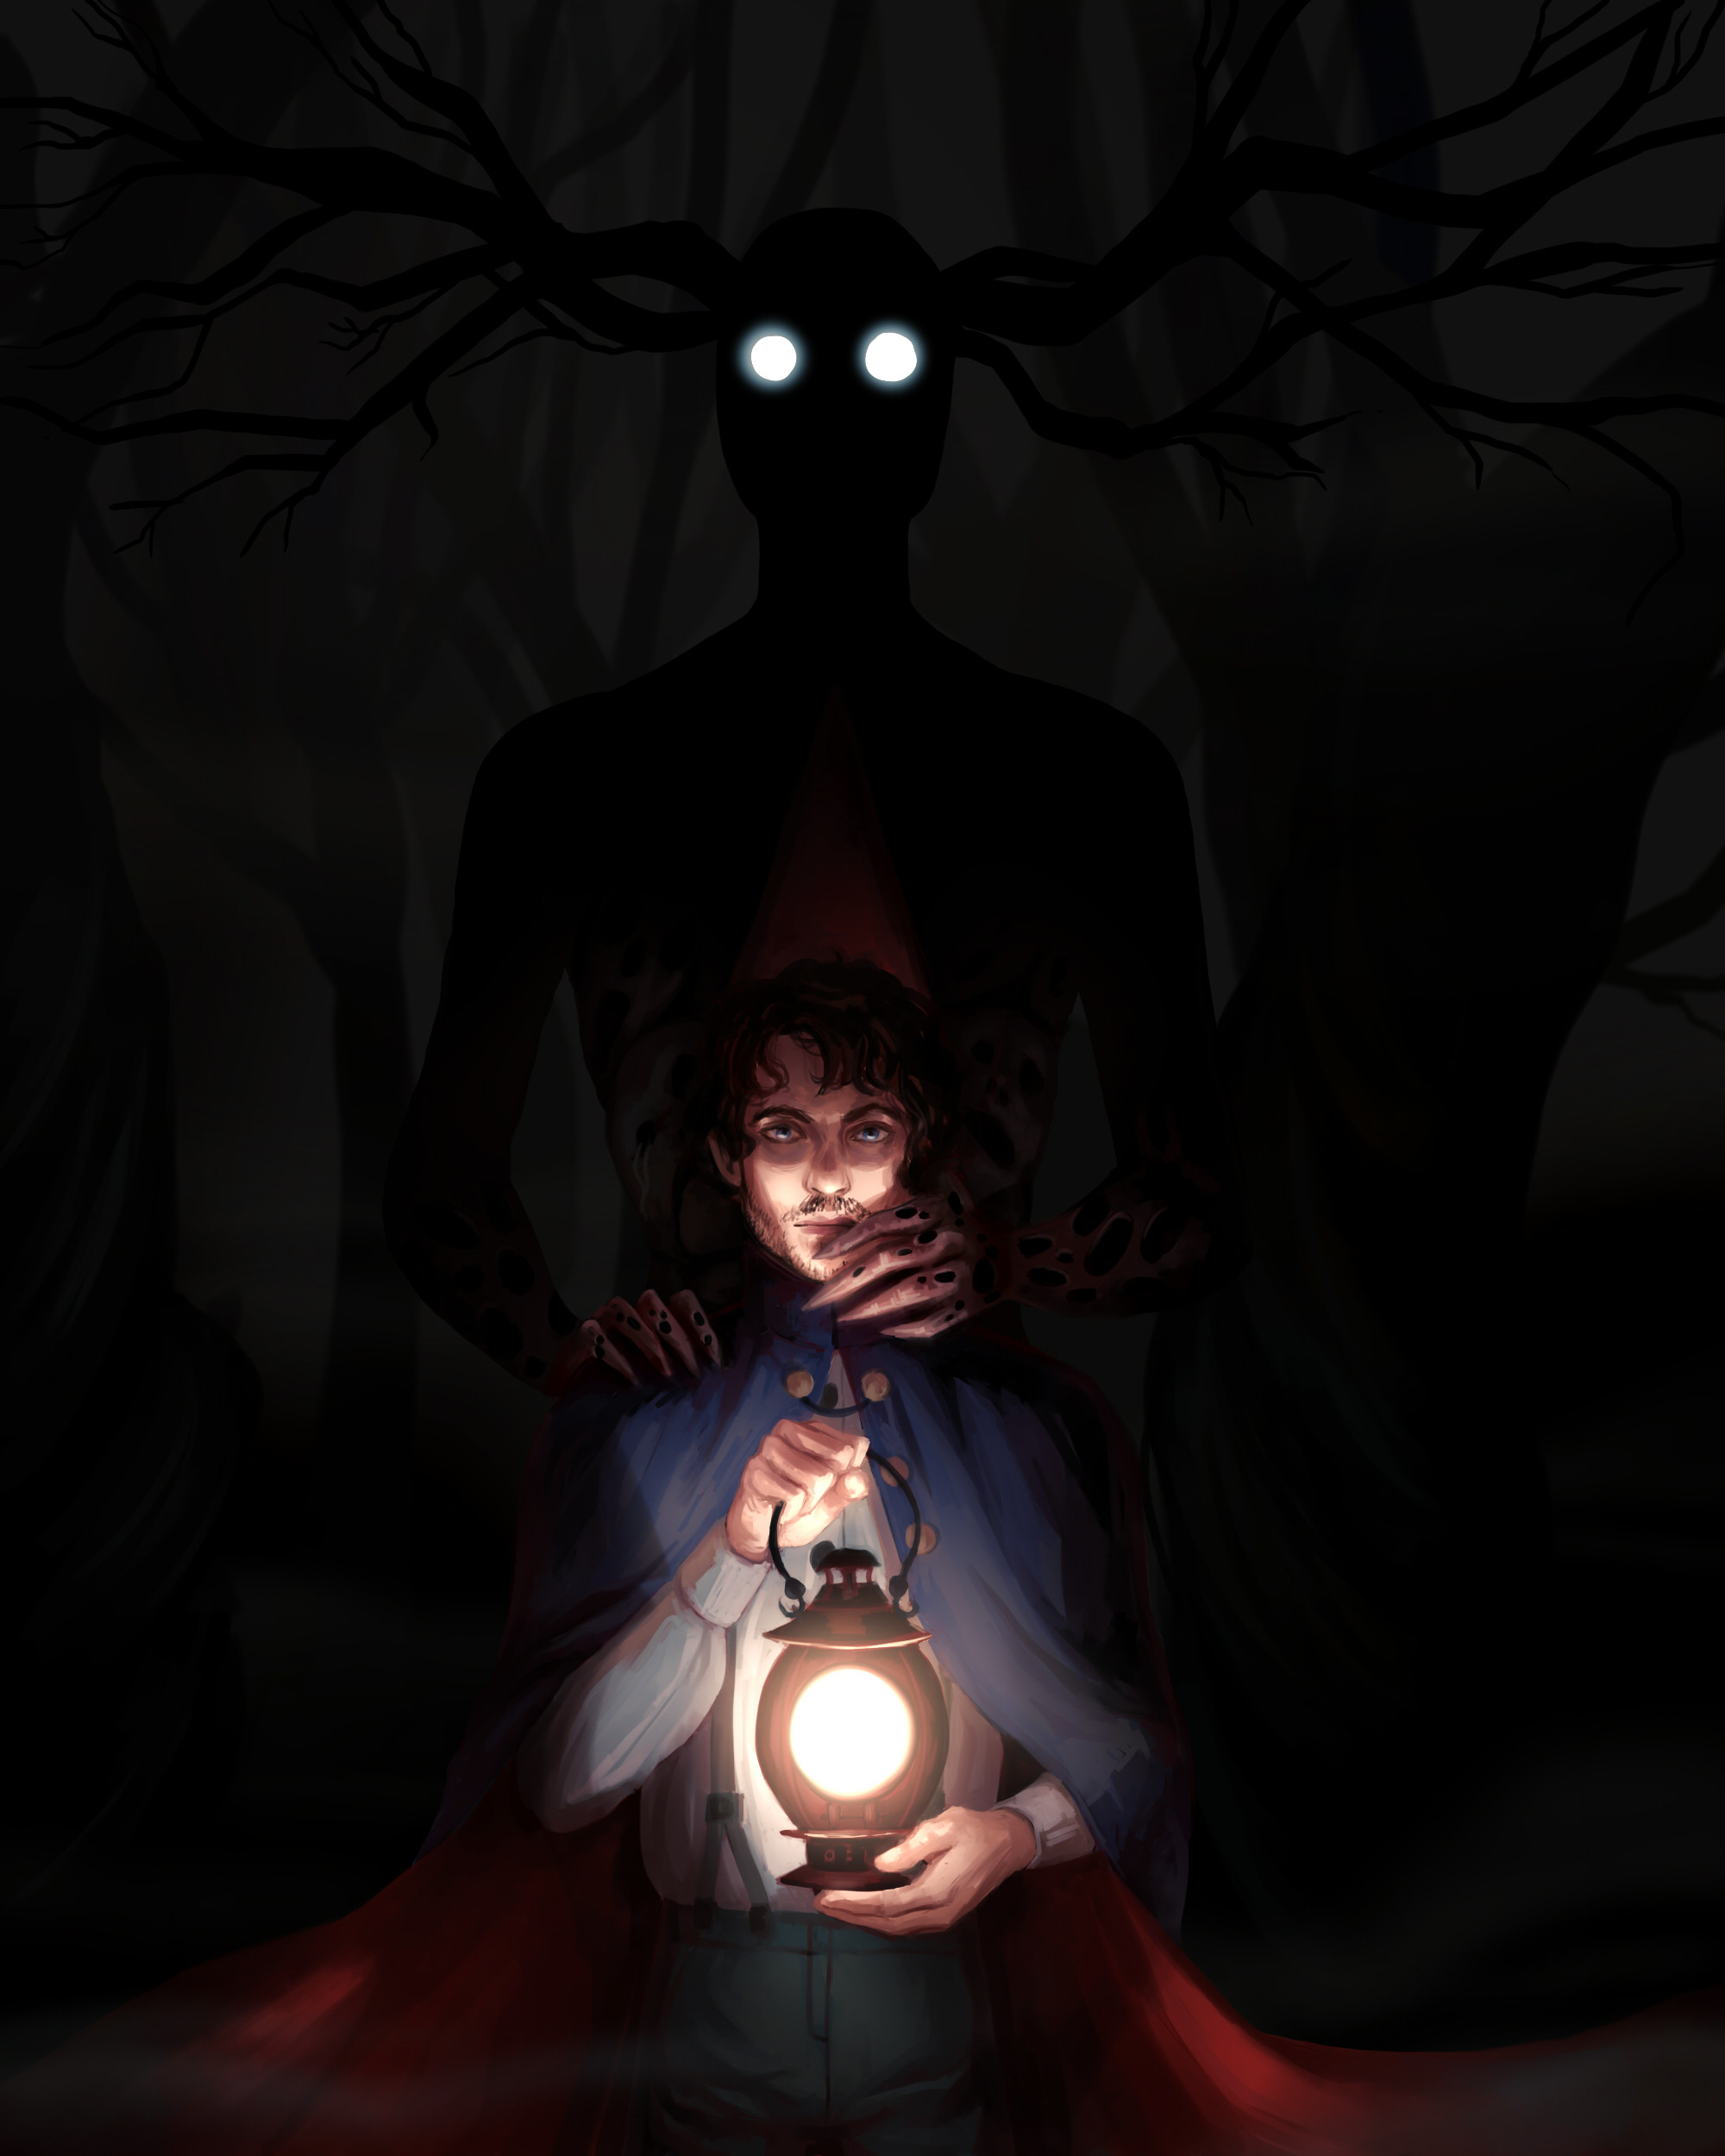 Over the garden wallHannibal by Emilyena